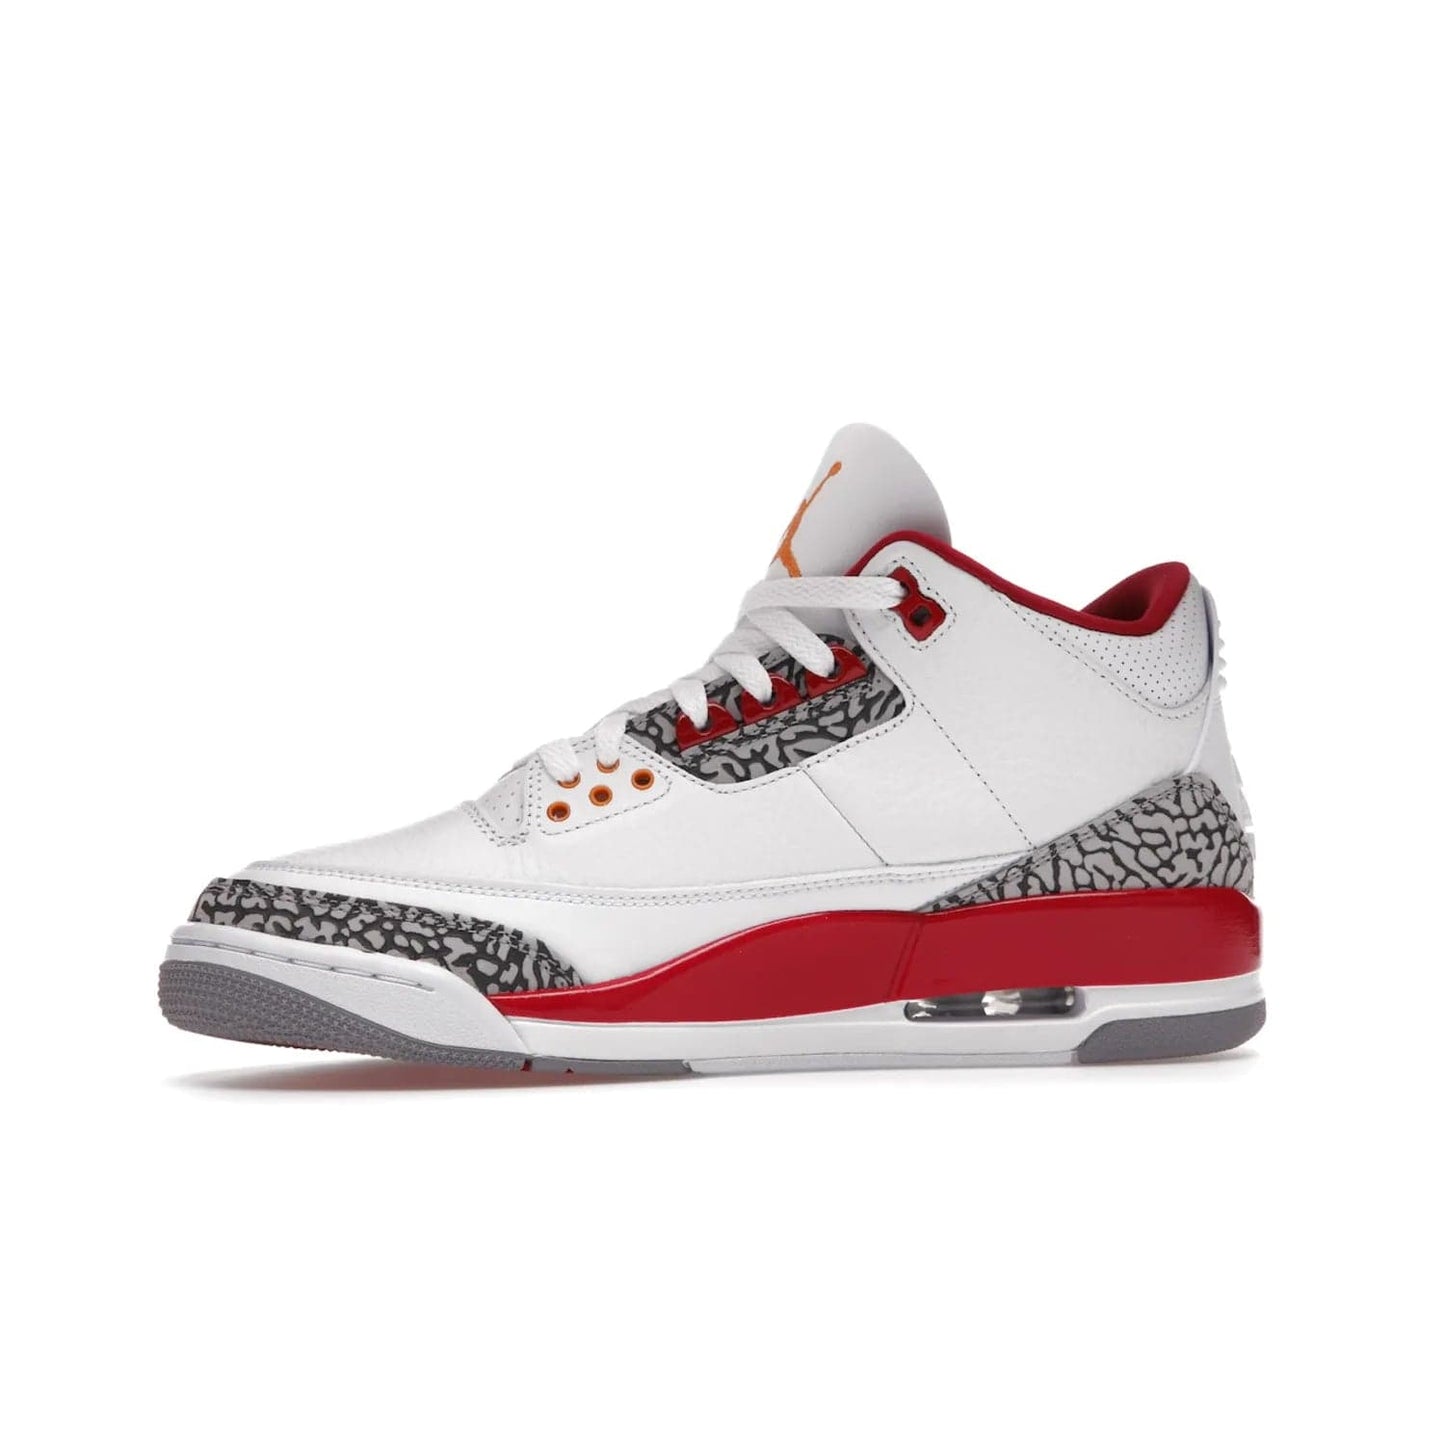 Jordan 3 Retro Cardinal Red - Image 18 - Only at www.BallersClubKickz.com - Air Jordan 3 Retro Cardinal Red combines classic style and modern appeal - white tumbled leather, signature Elephant Print overlays, cardinal red midsoles, Jumpman logo embroidery. Available Feb 2022.